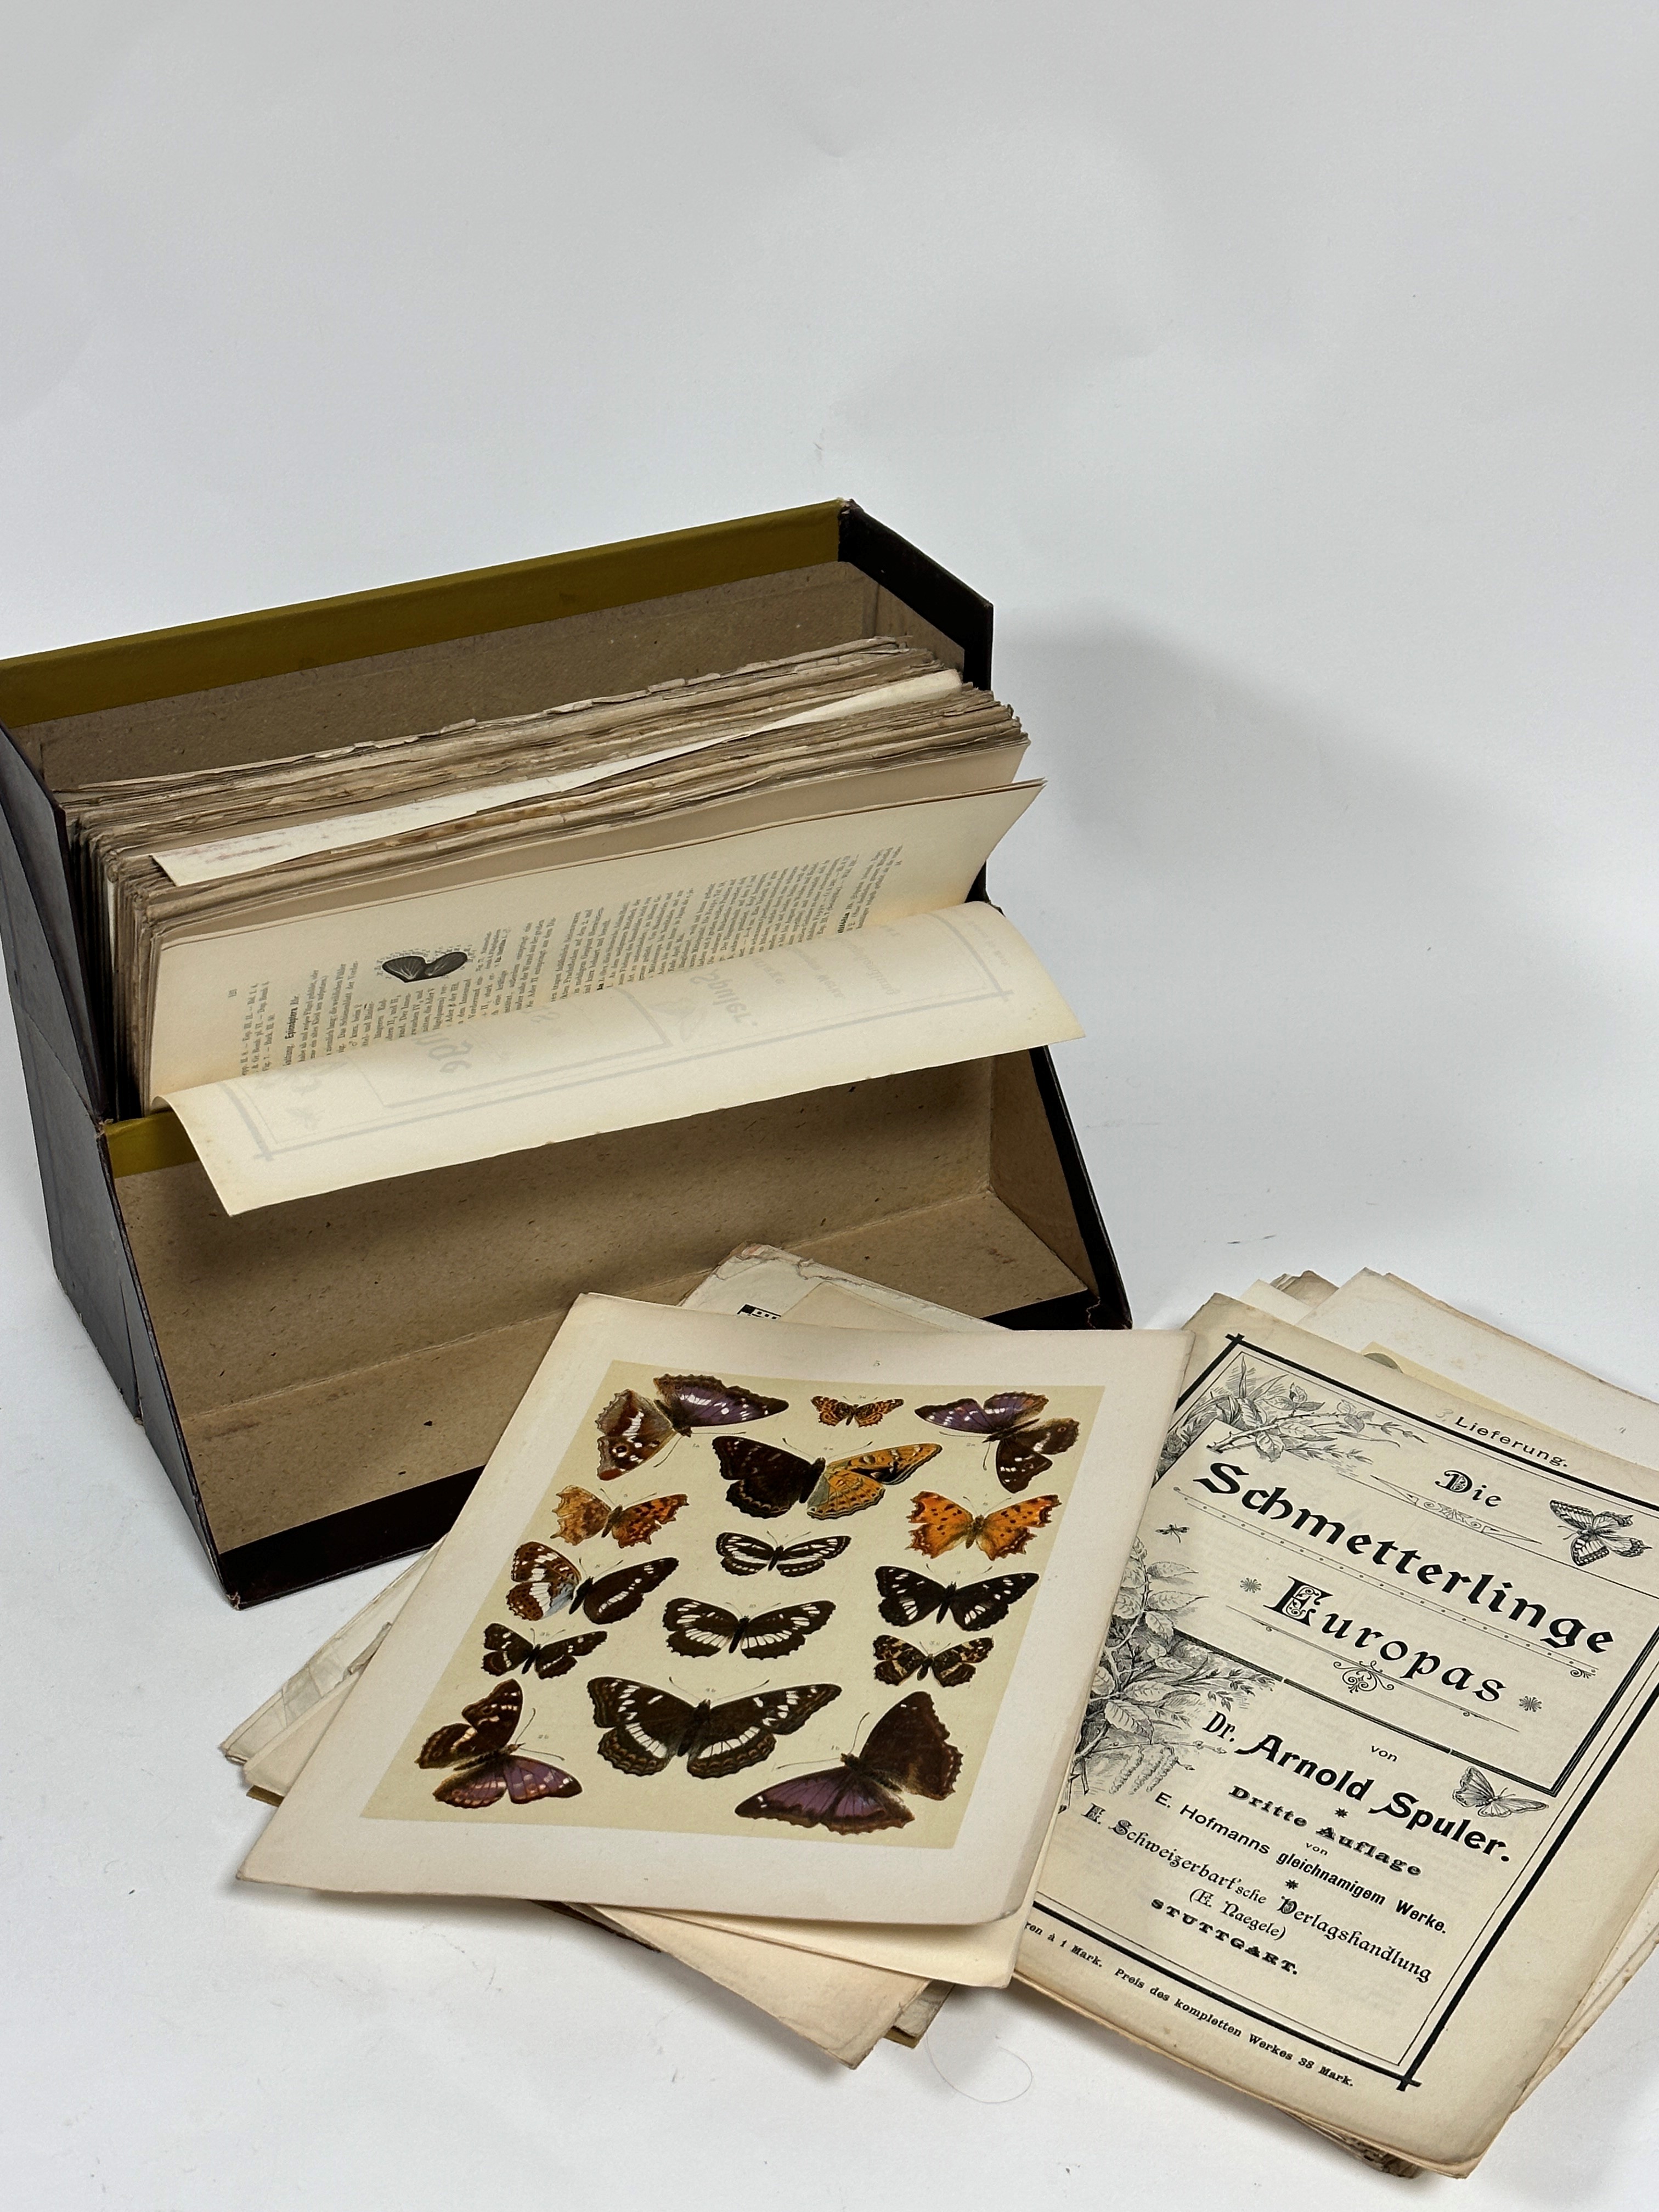 A folio containing a large collection of unbound pages of The Works of Doctor Arnold Spuler,